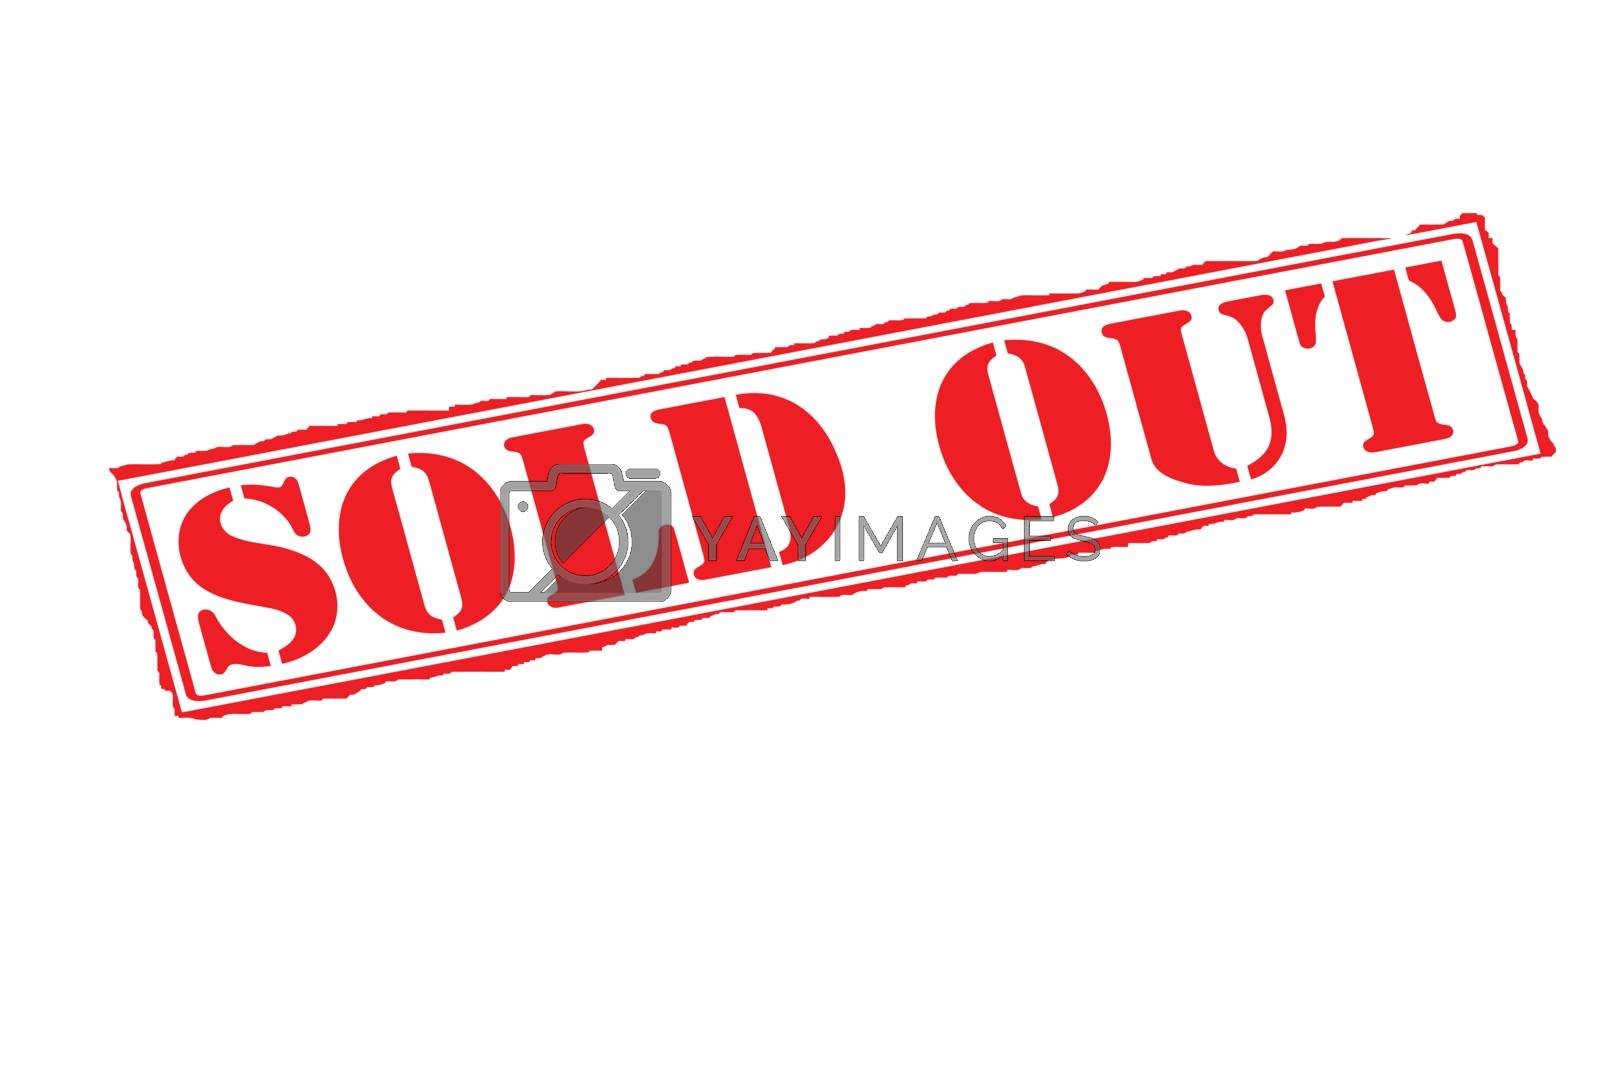 Sold out by carmenbobo Vectors & Illustrations Free download - Yayimages